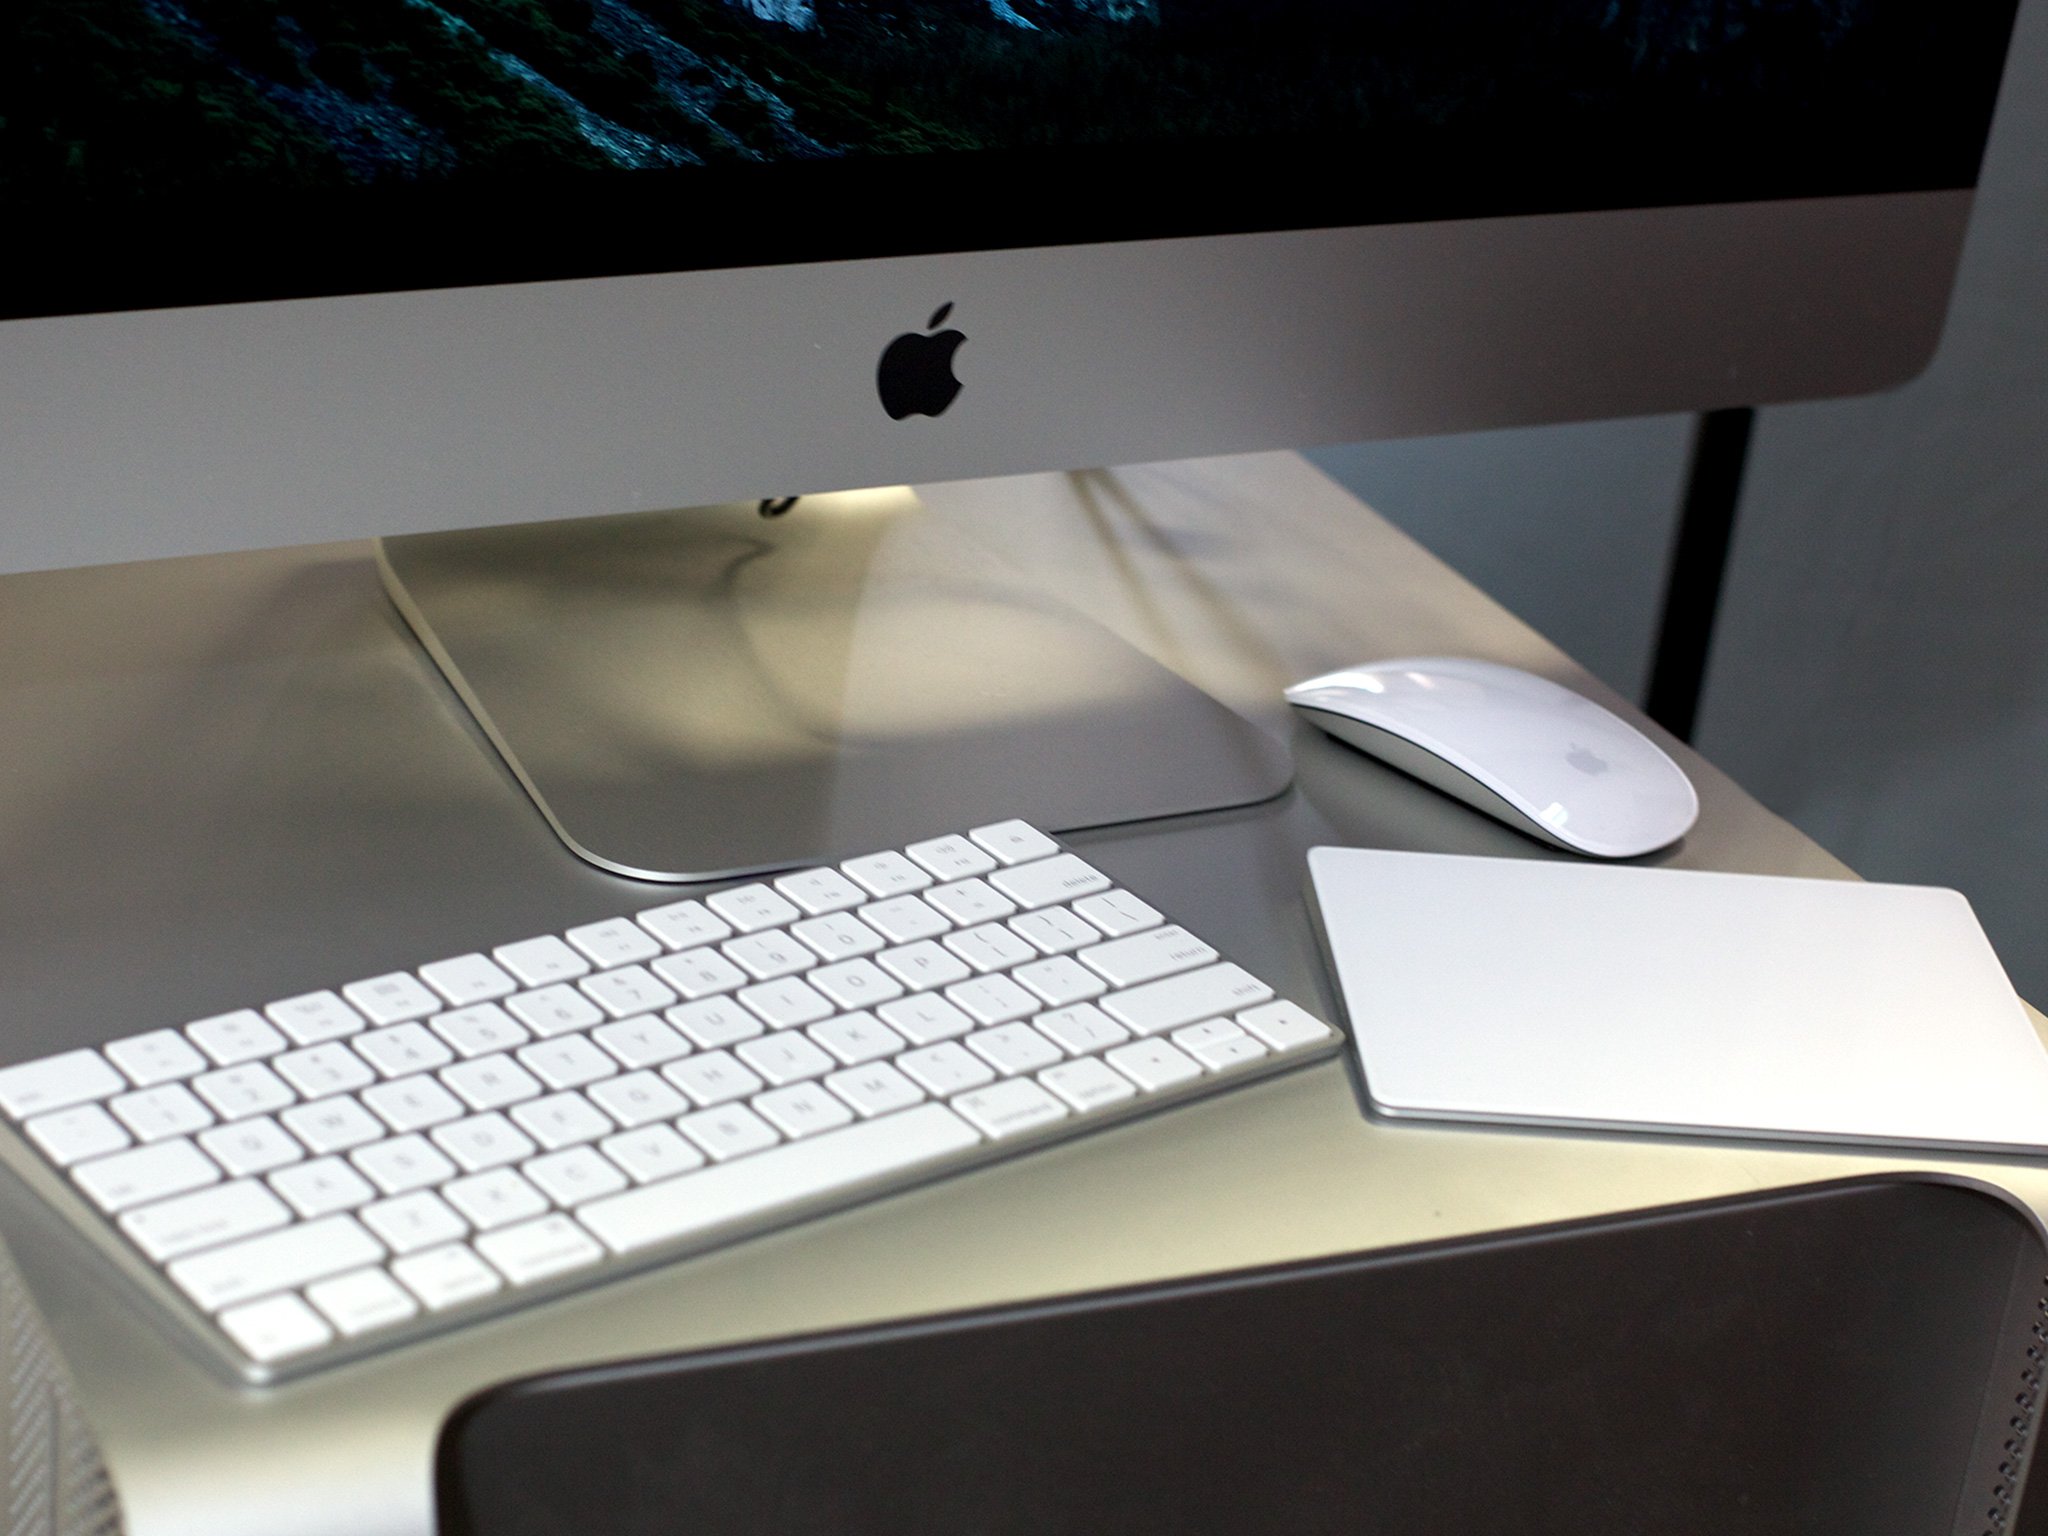 What would you change about Apple's 'Magic' accessories for Mac?